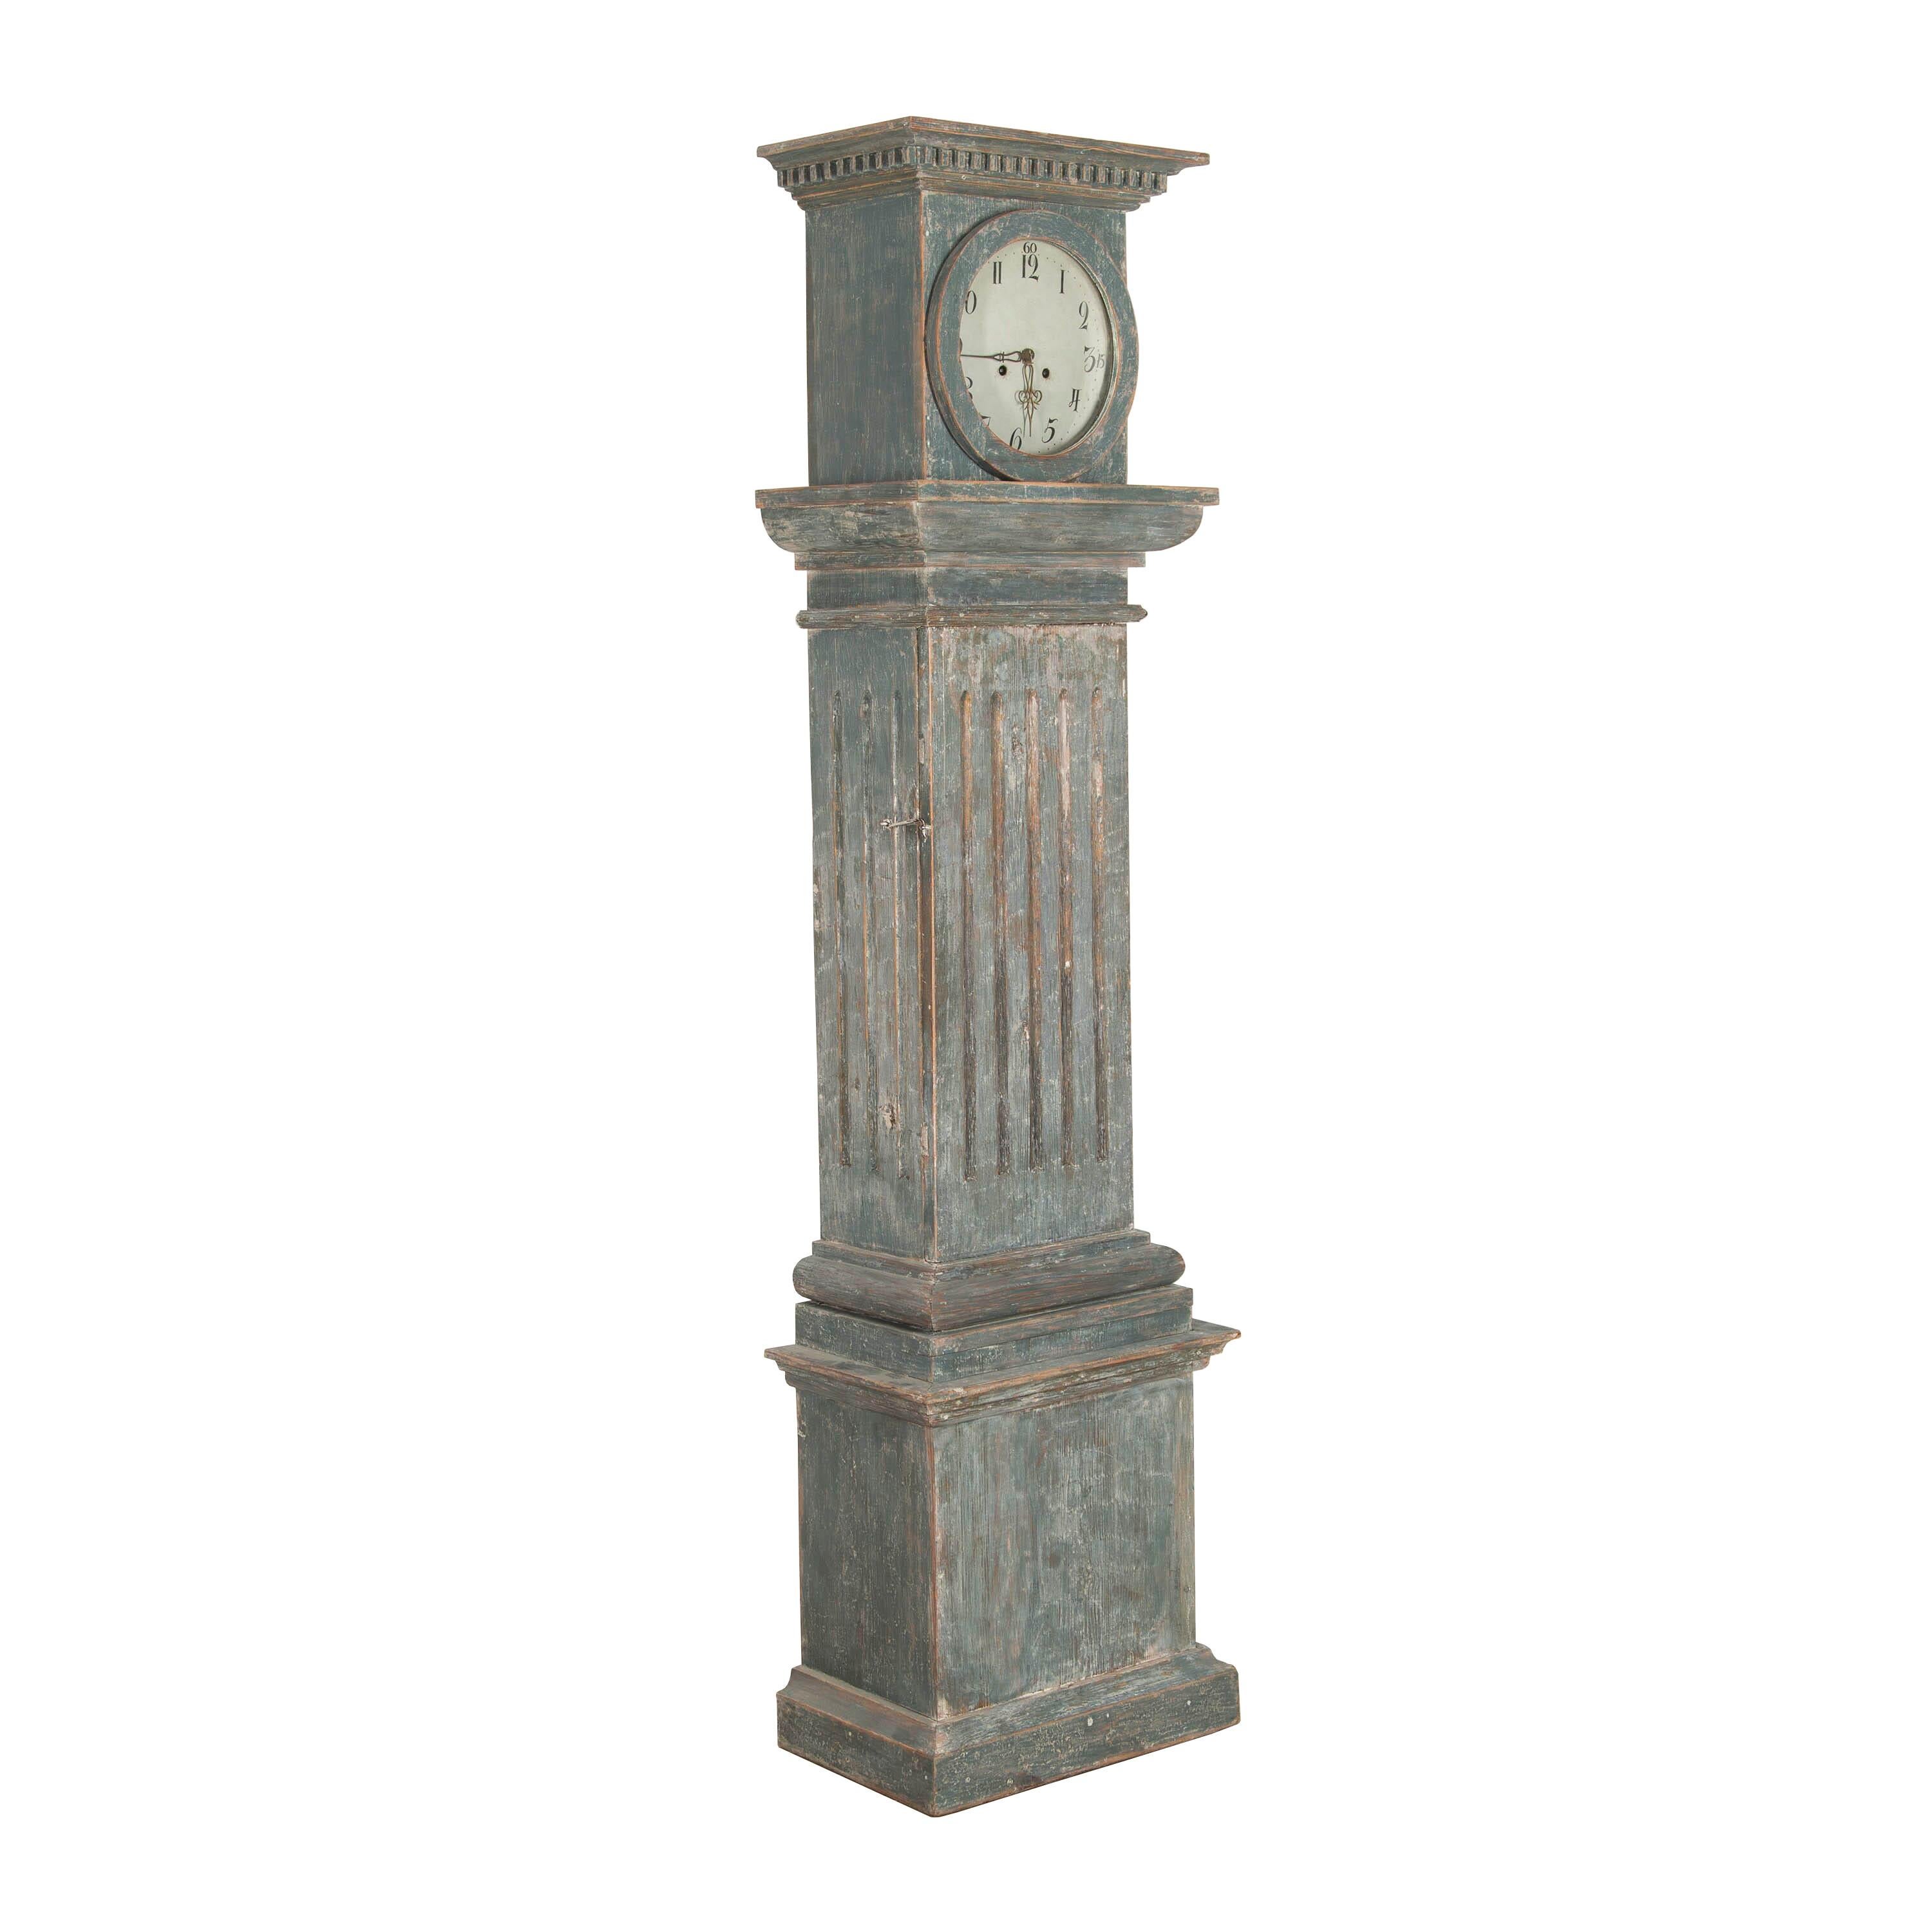 Period Gustavian column clock from Dalarna.
This carved wooden clock retains its original blue paintwork which has been revealed after scraping. It has an unusual design that resembles a classic English country house clock rather than a Swedish